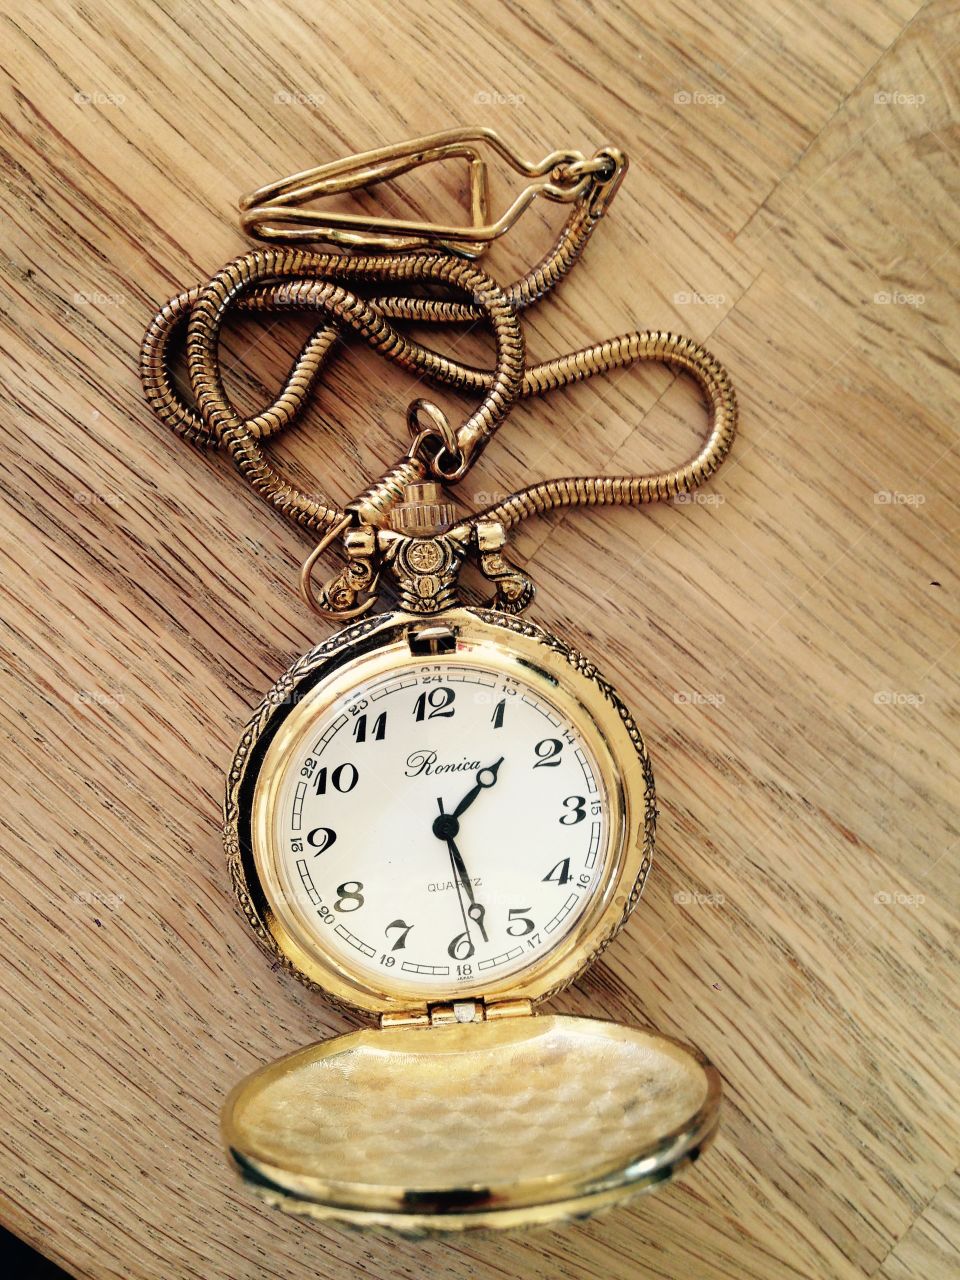 Watch. Old gold watch